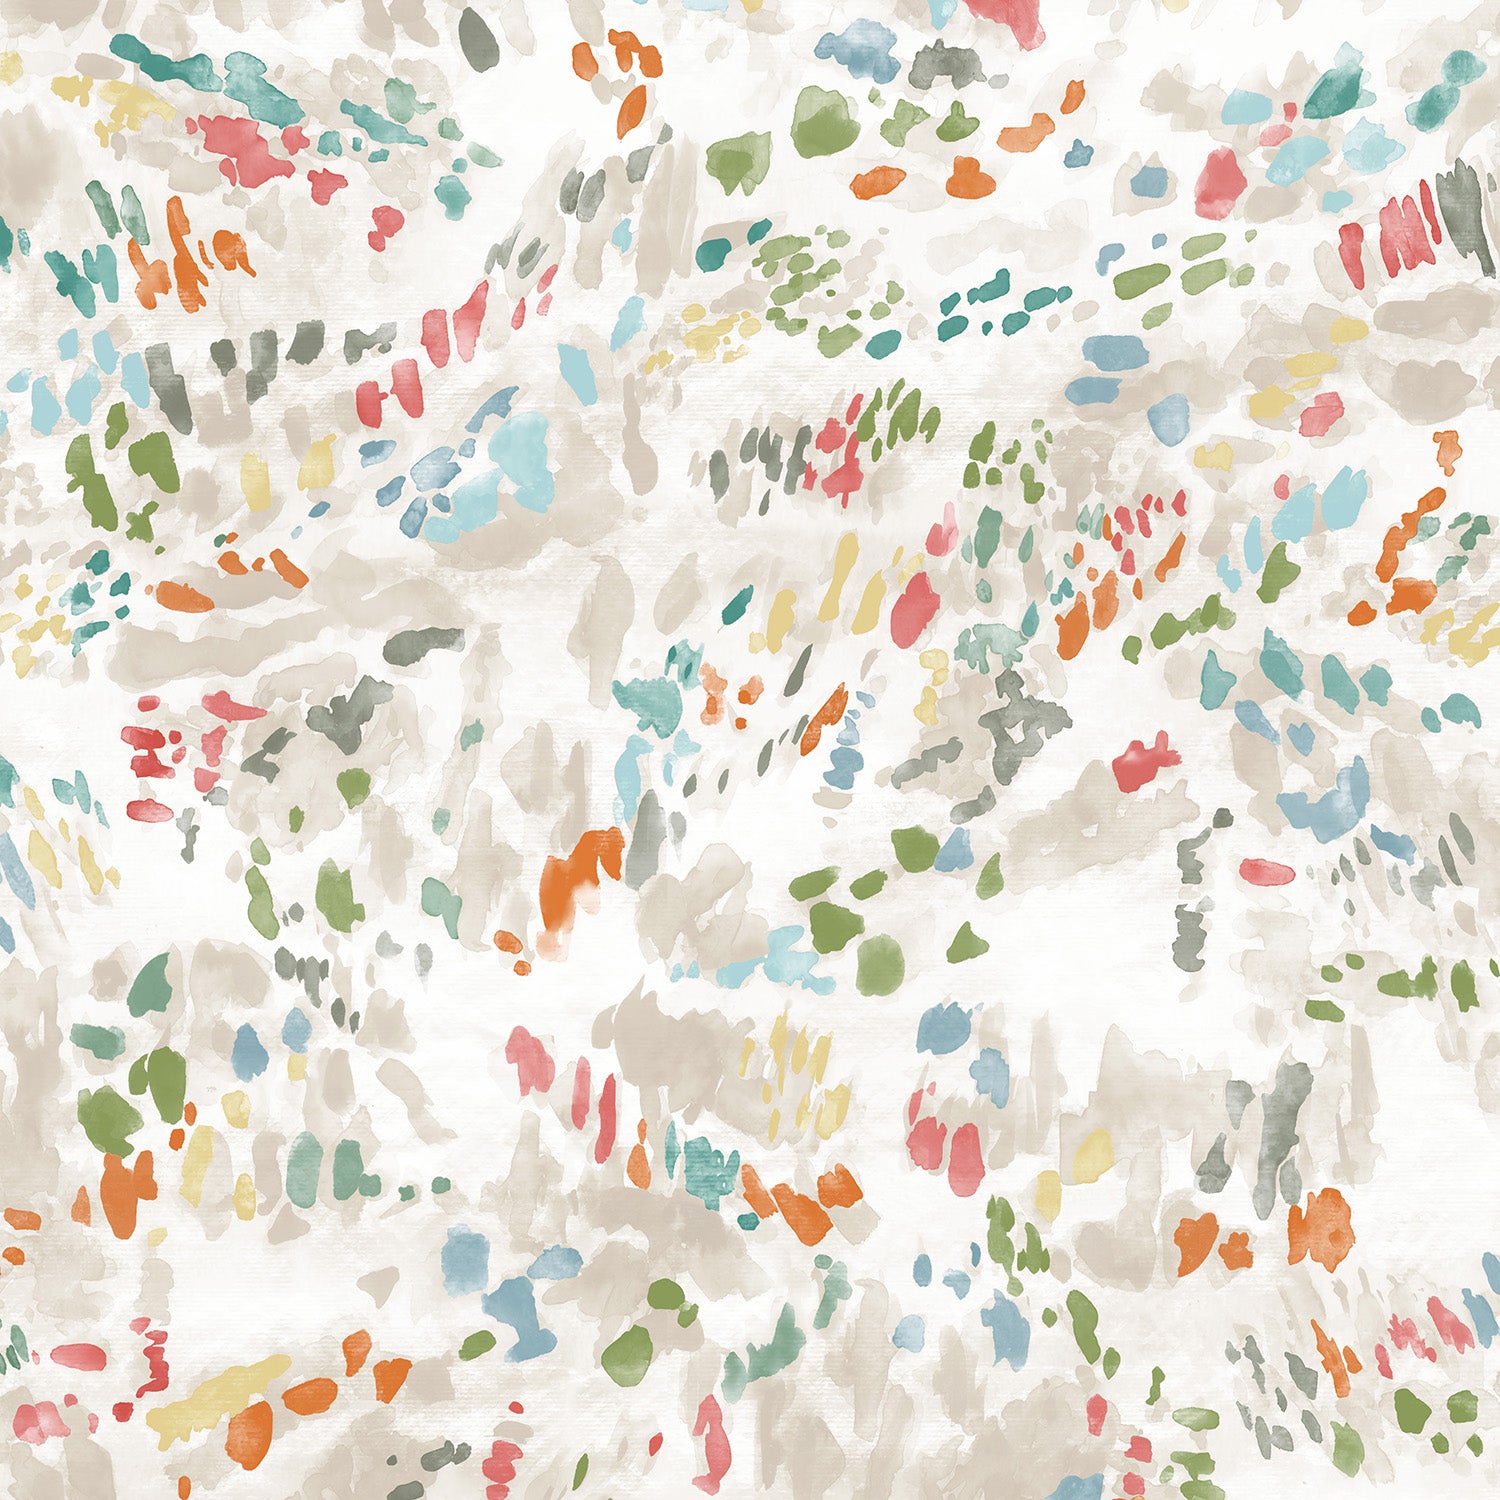 Detail of wallpaper in a dappled abstract print in shades of blue, green and orange and tan on a white field.